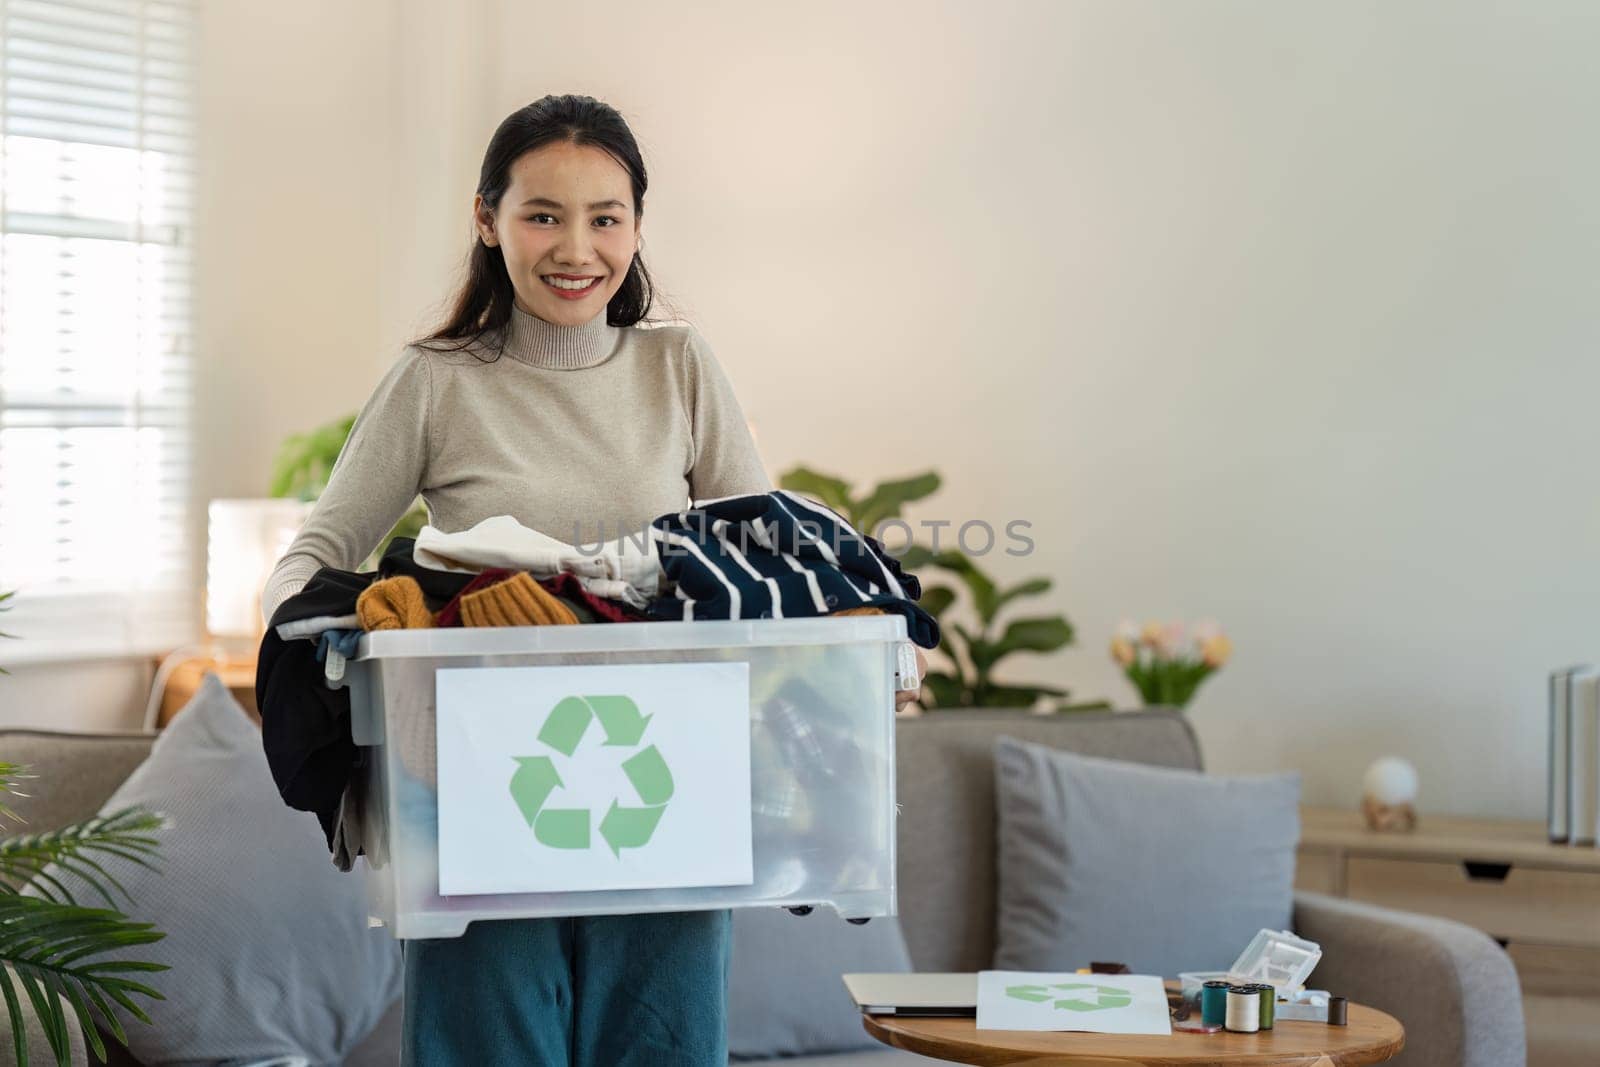 A young woman holding a recycling bin filled with clothes, emphasizing the importance of recycling and sustainable living in a modern home setting.